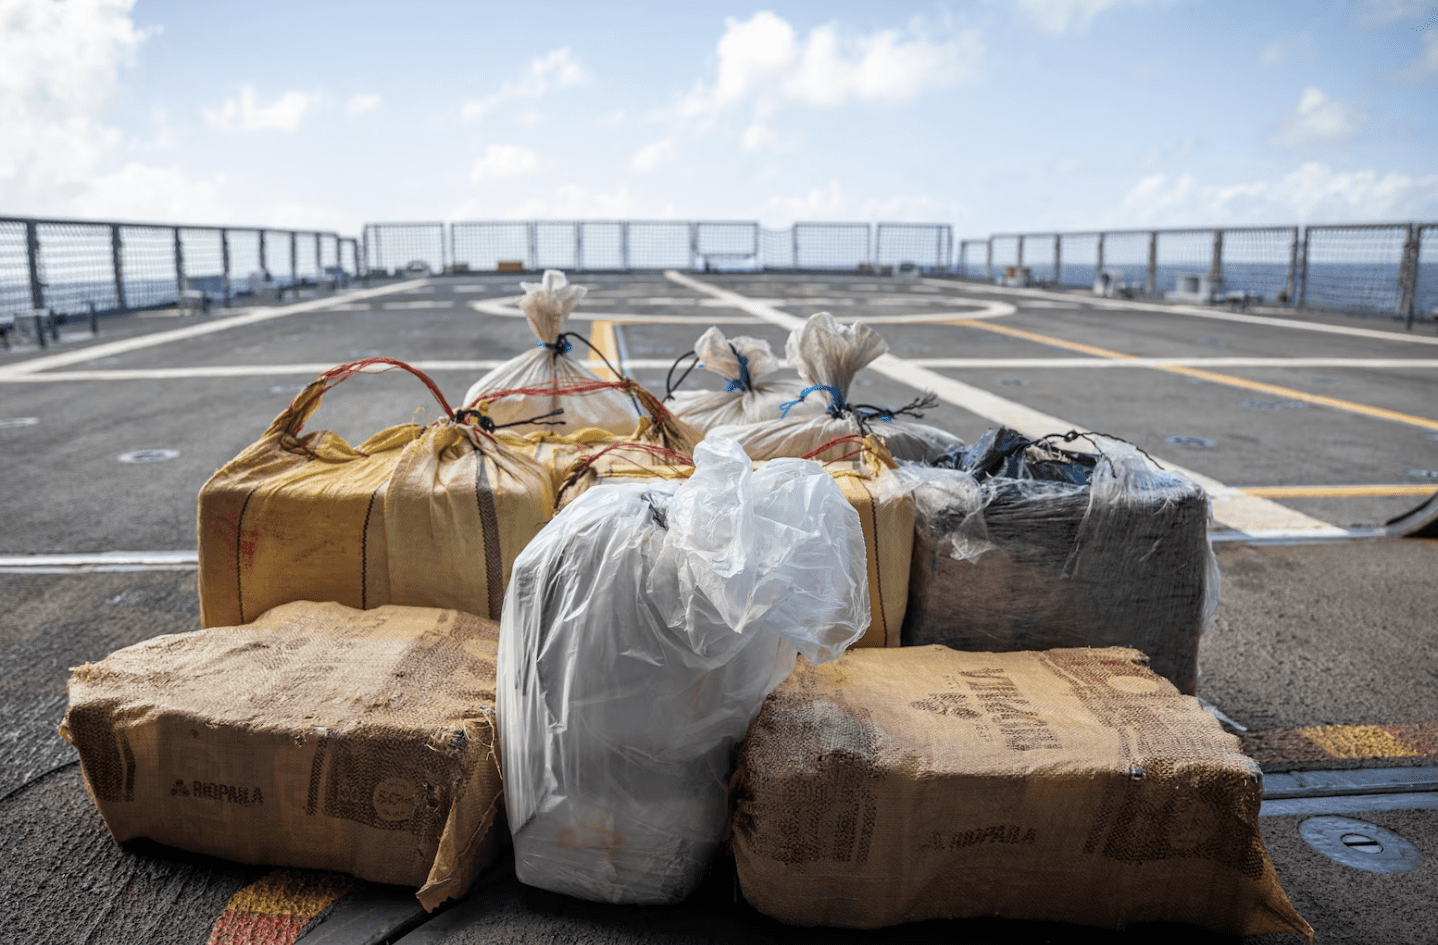 Cocaine flowed through Mexico's airports